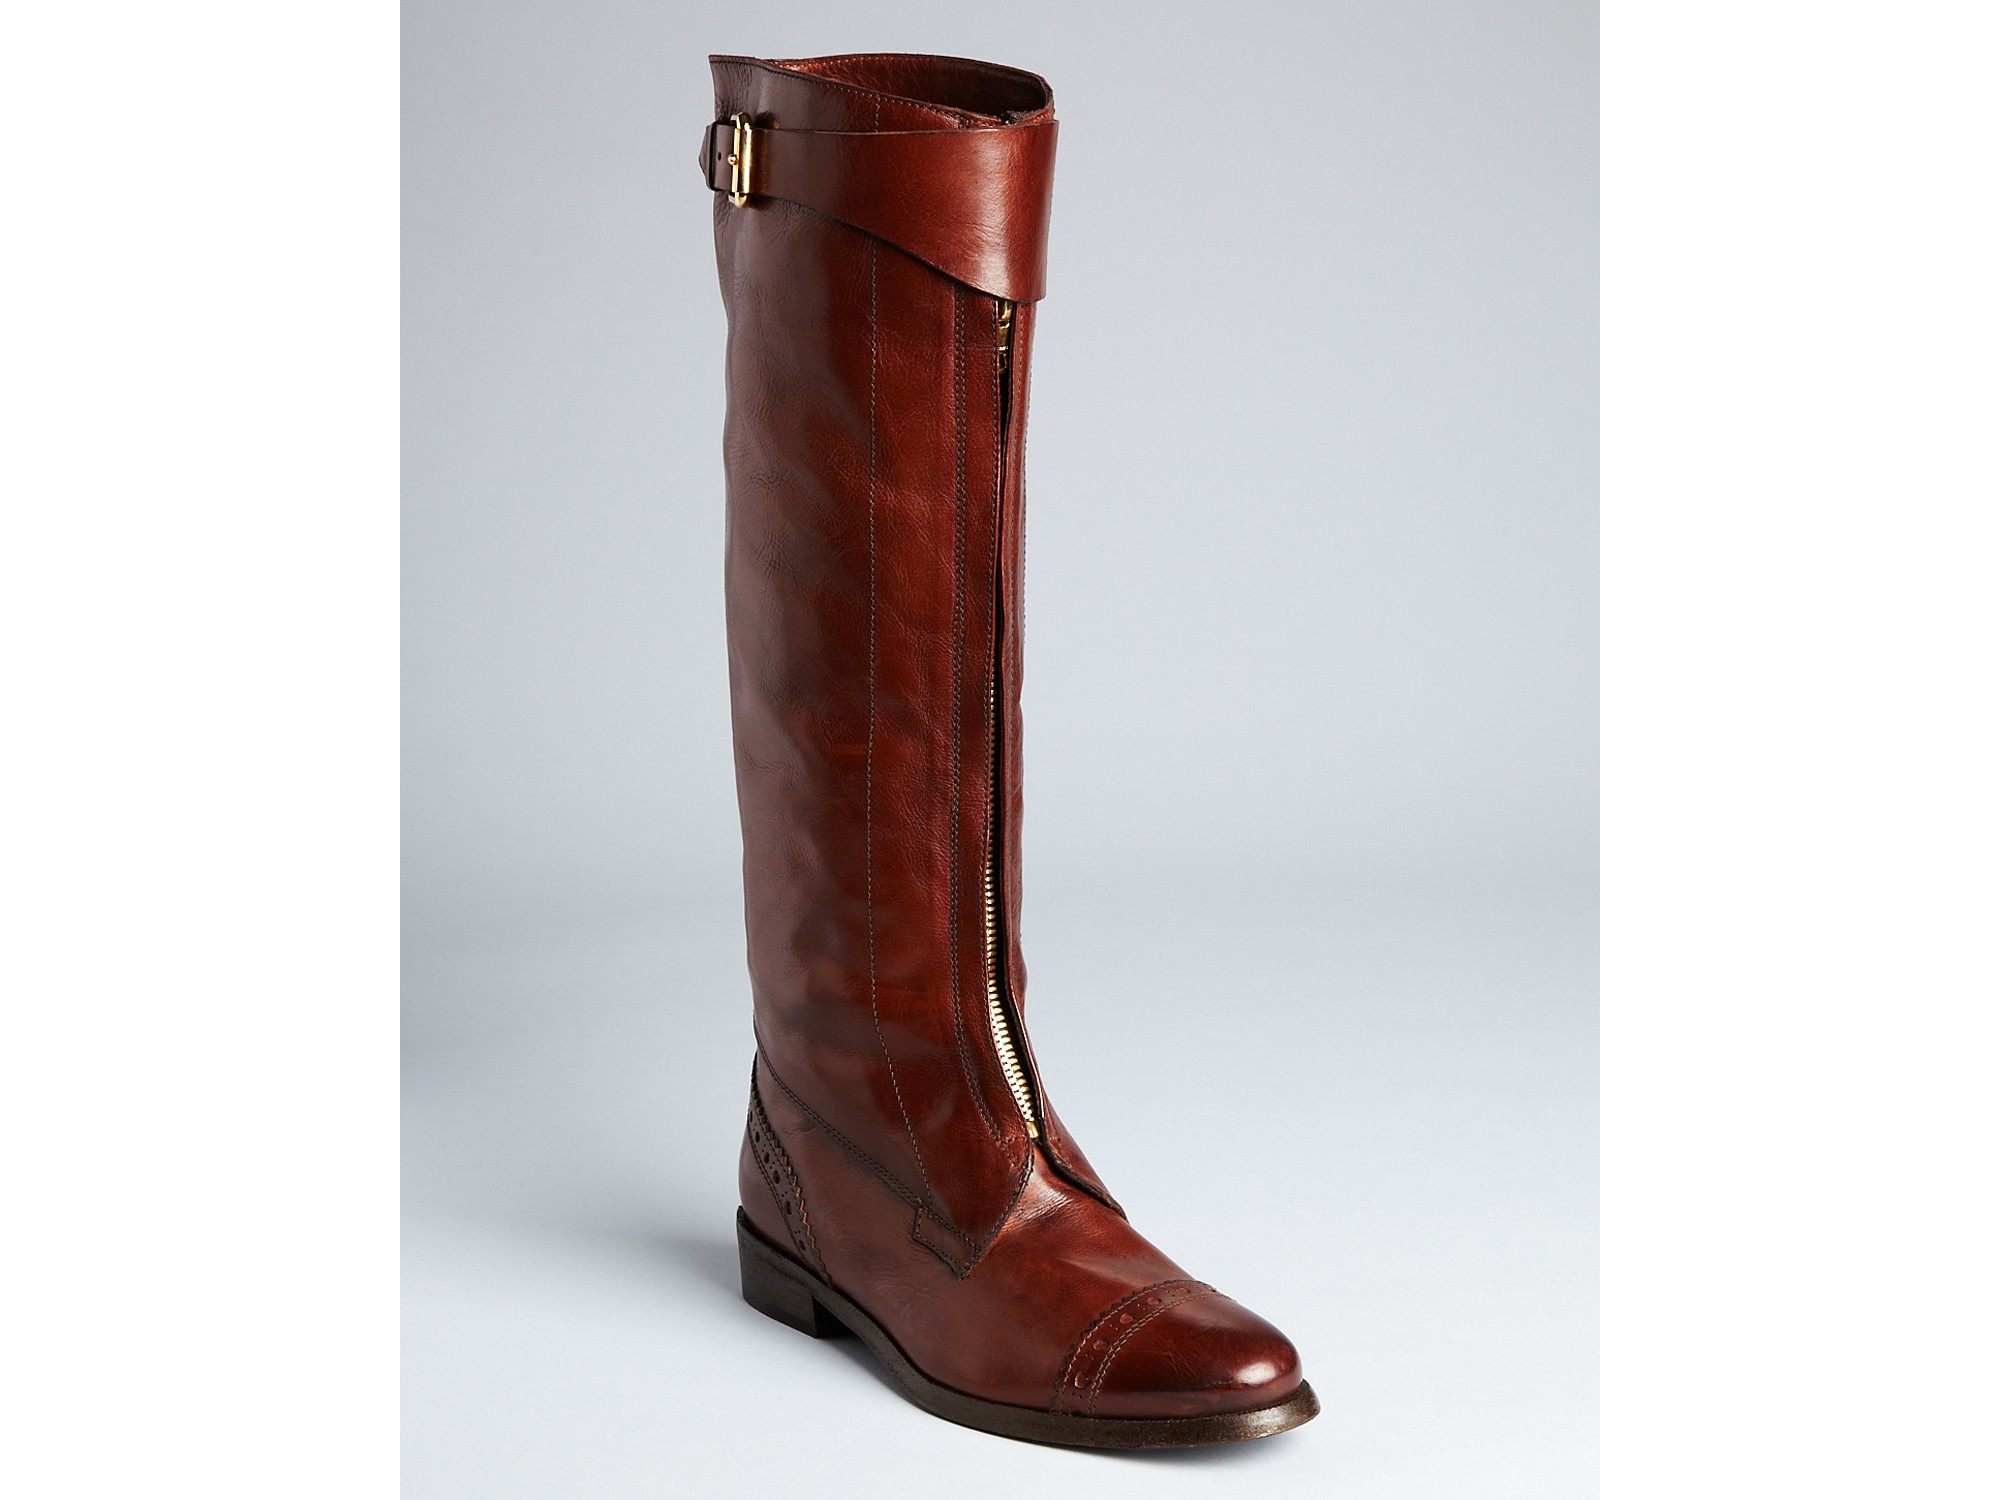 burberry riding boots sale